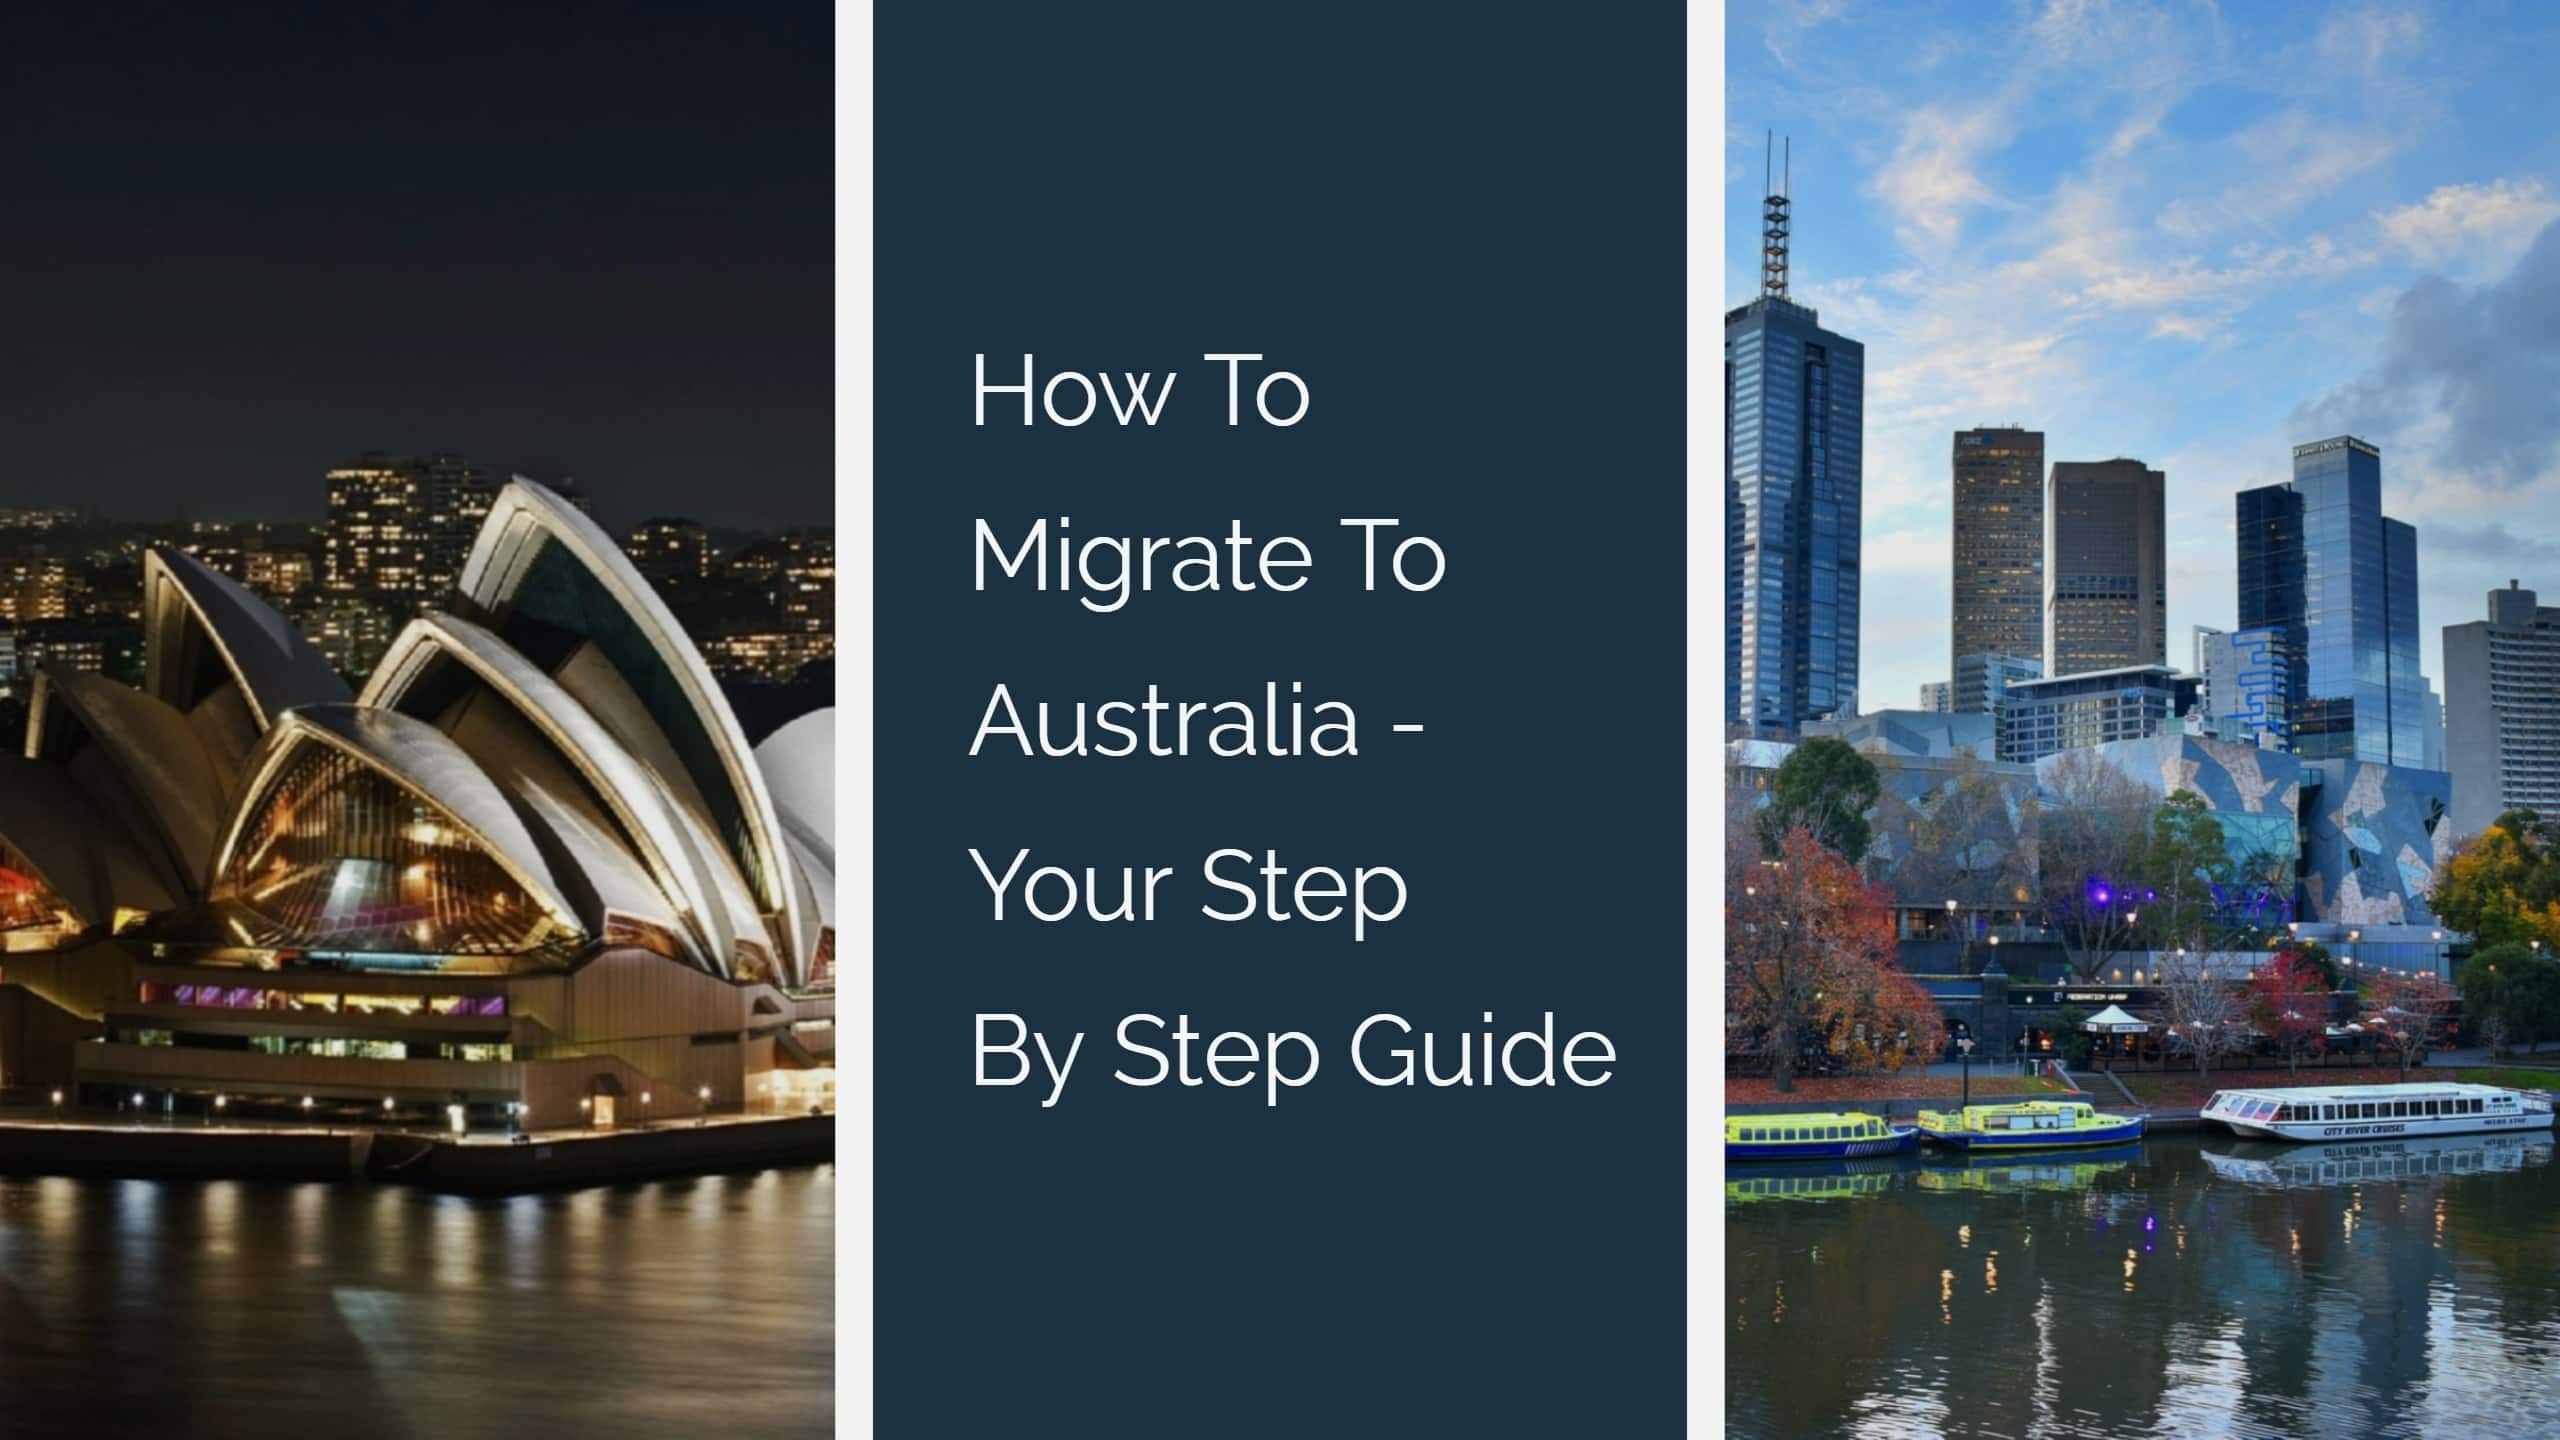 How To Migrate To Australia - Your Step By Step Guide. Visa Australia, Opening Bank Account in Australia, Tax in Australia, Accommodation in Australia, Jobs in Australia